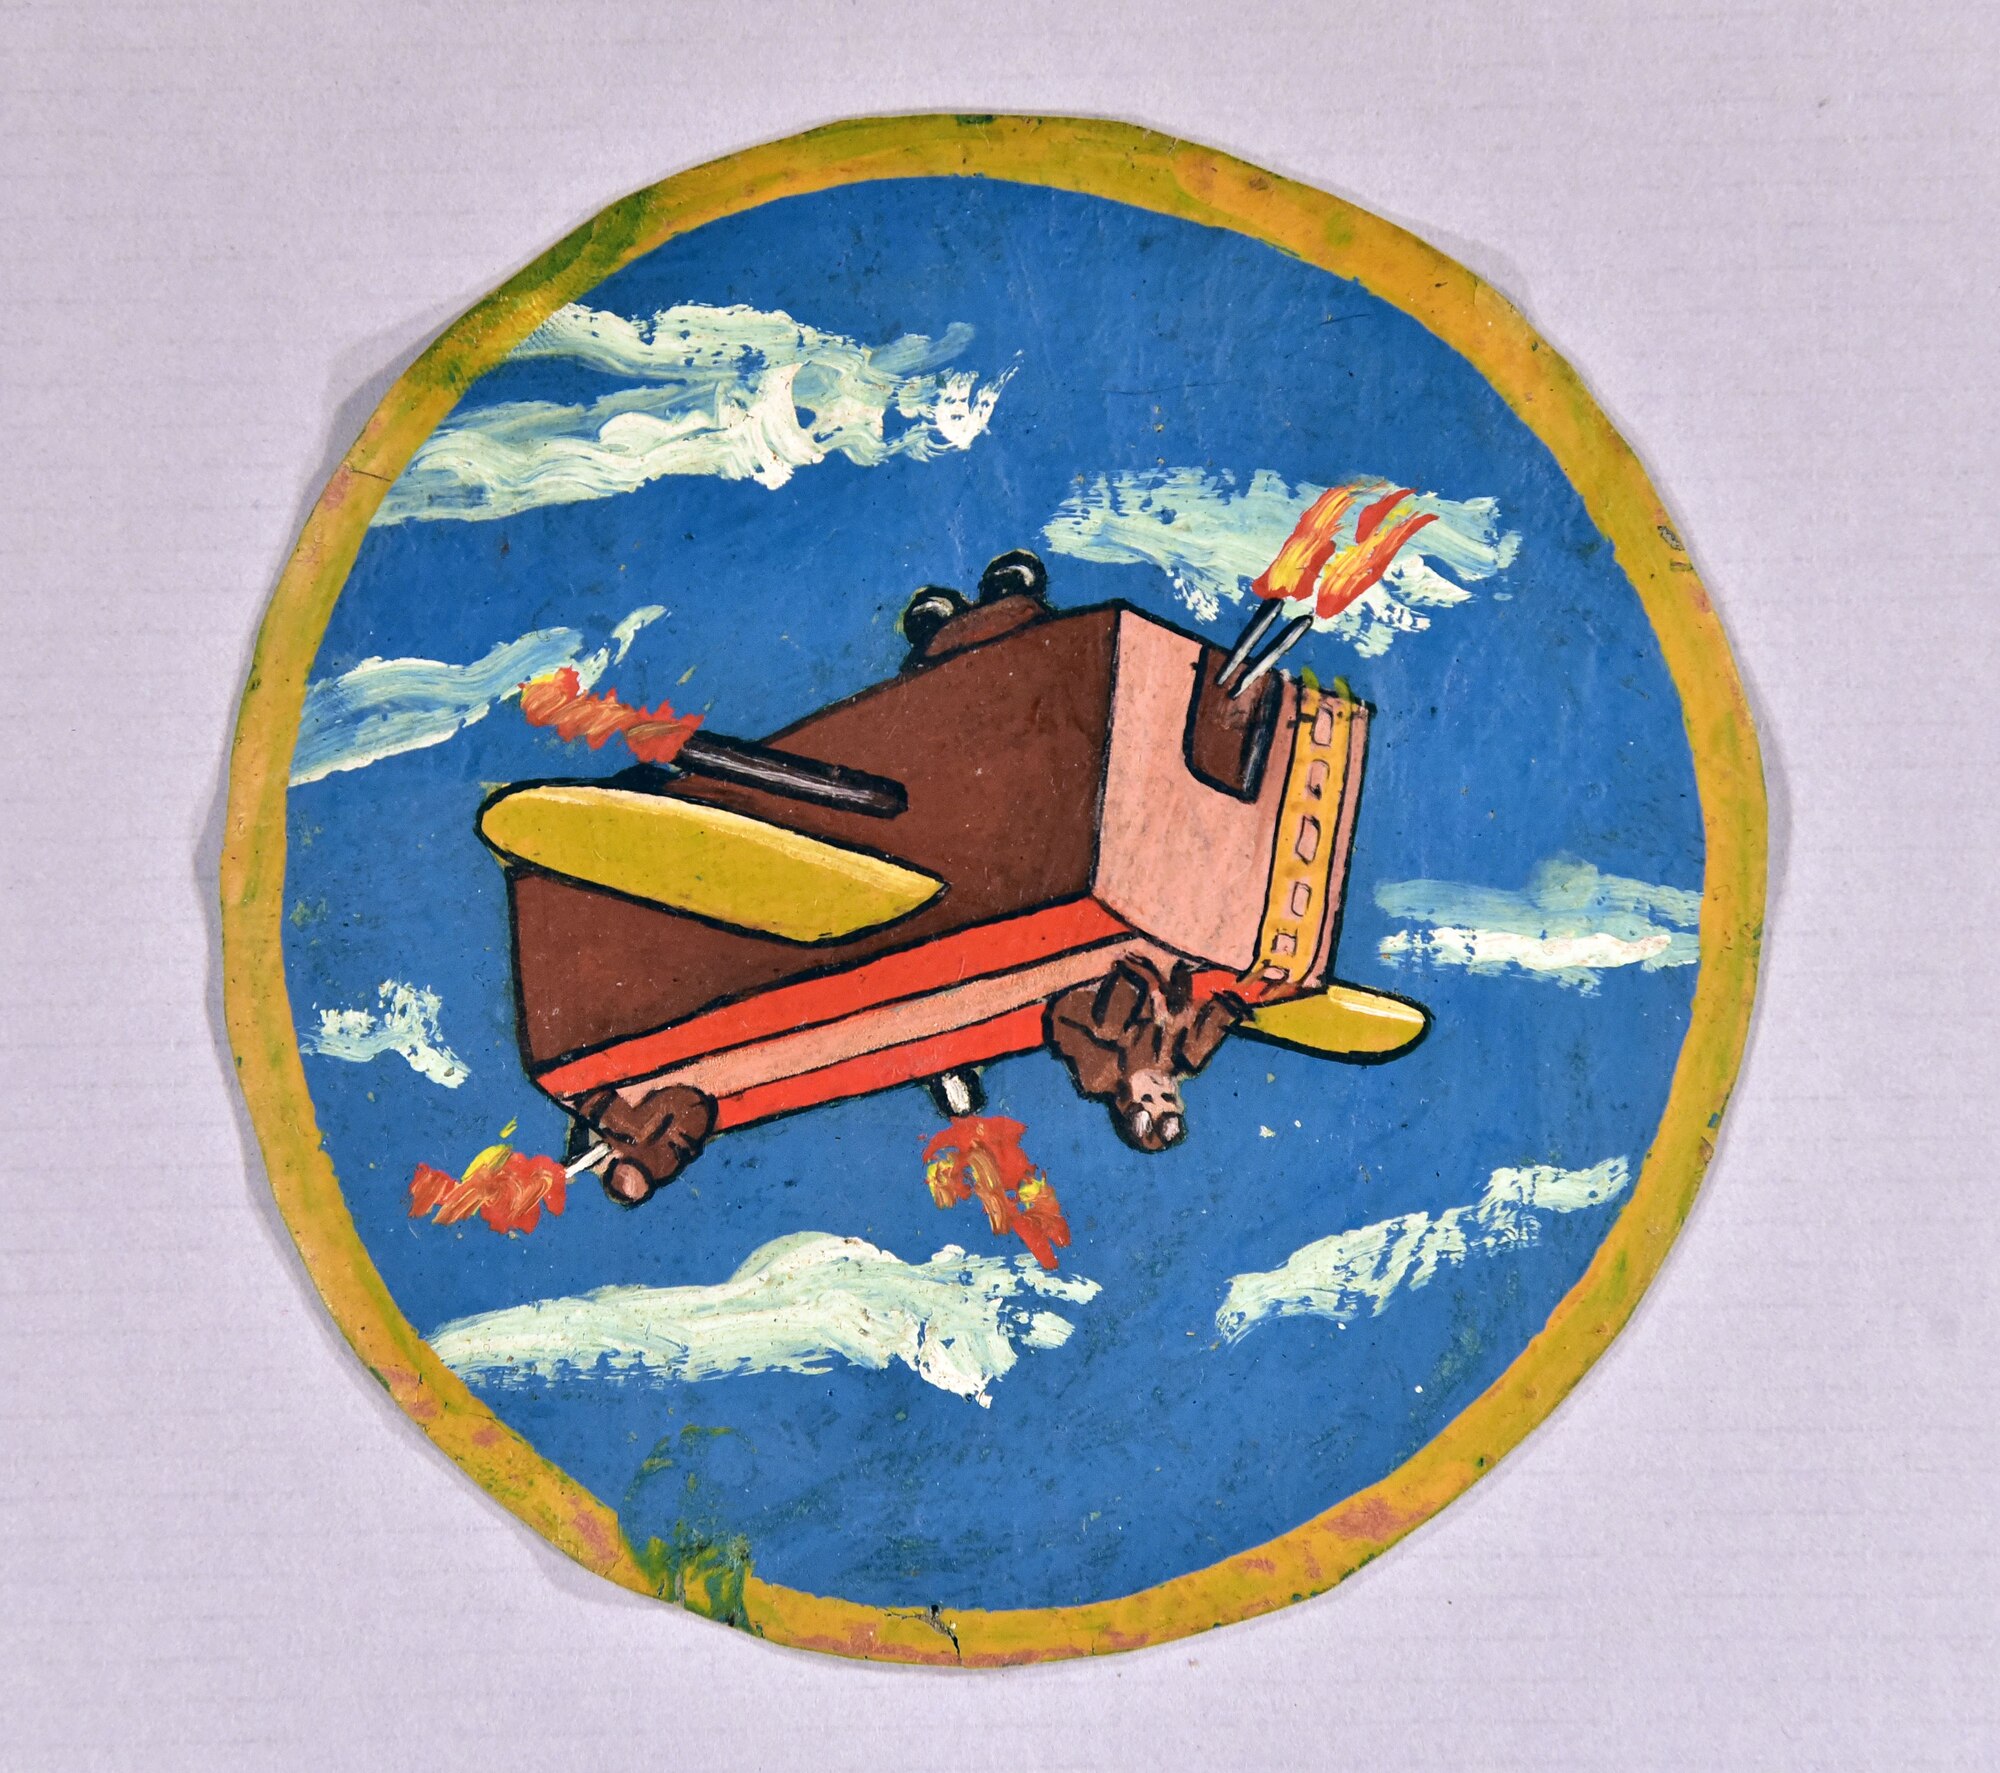 Plans call for this artifact to be displayed near the B-17F Memphis Belle™ as part of the new strategic bombardment exhibit in the WWII Gallery, which opens to the public on May 17, 2018. Hand-painted leather 727th Bomb Squadron patch worn by 1st Lt Robert Henbest, a B-24 bombardier in the Fifteenth Air Force.